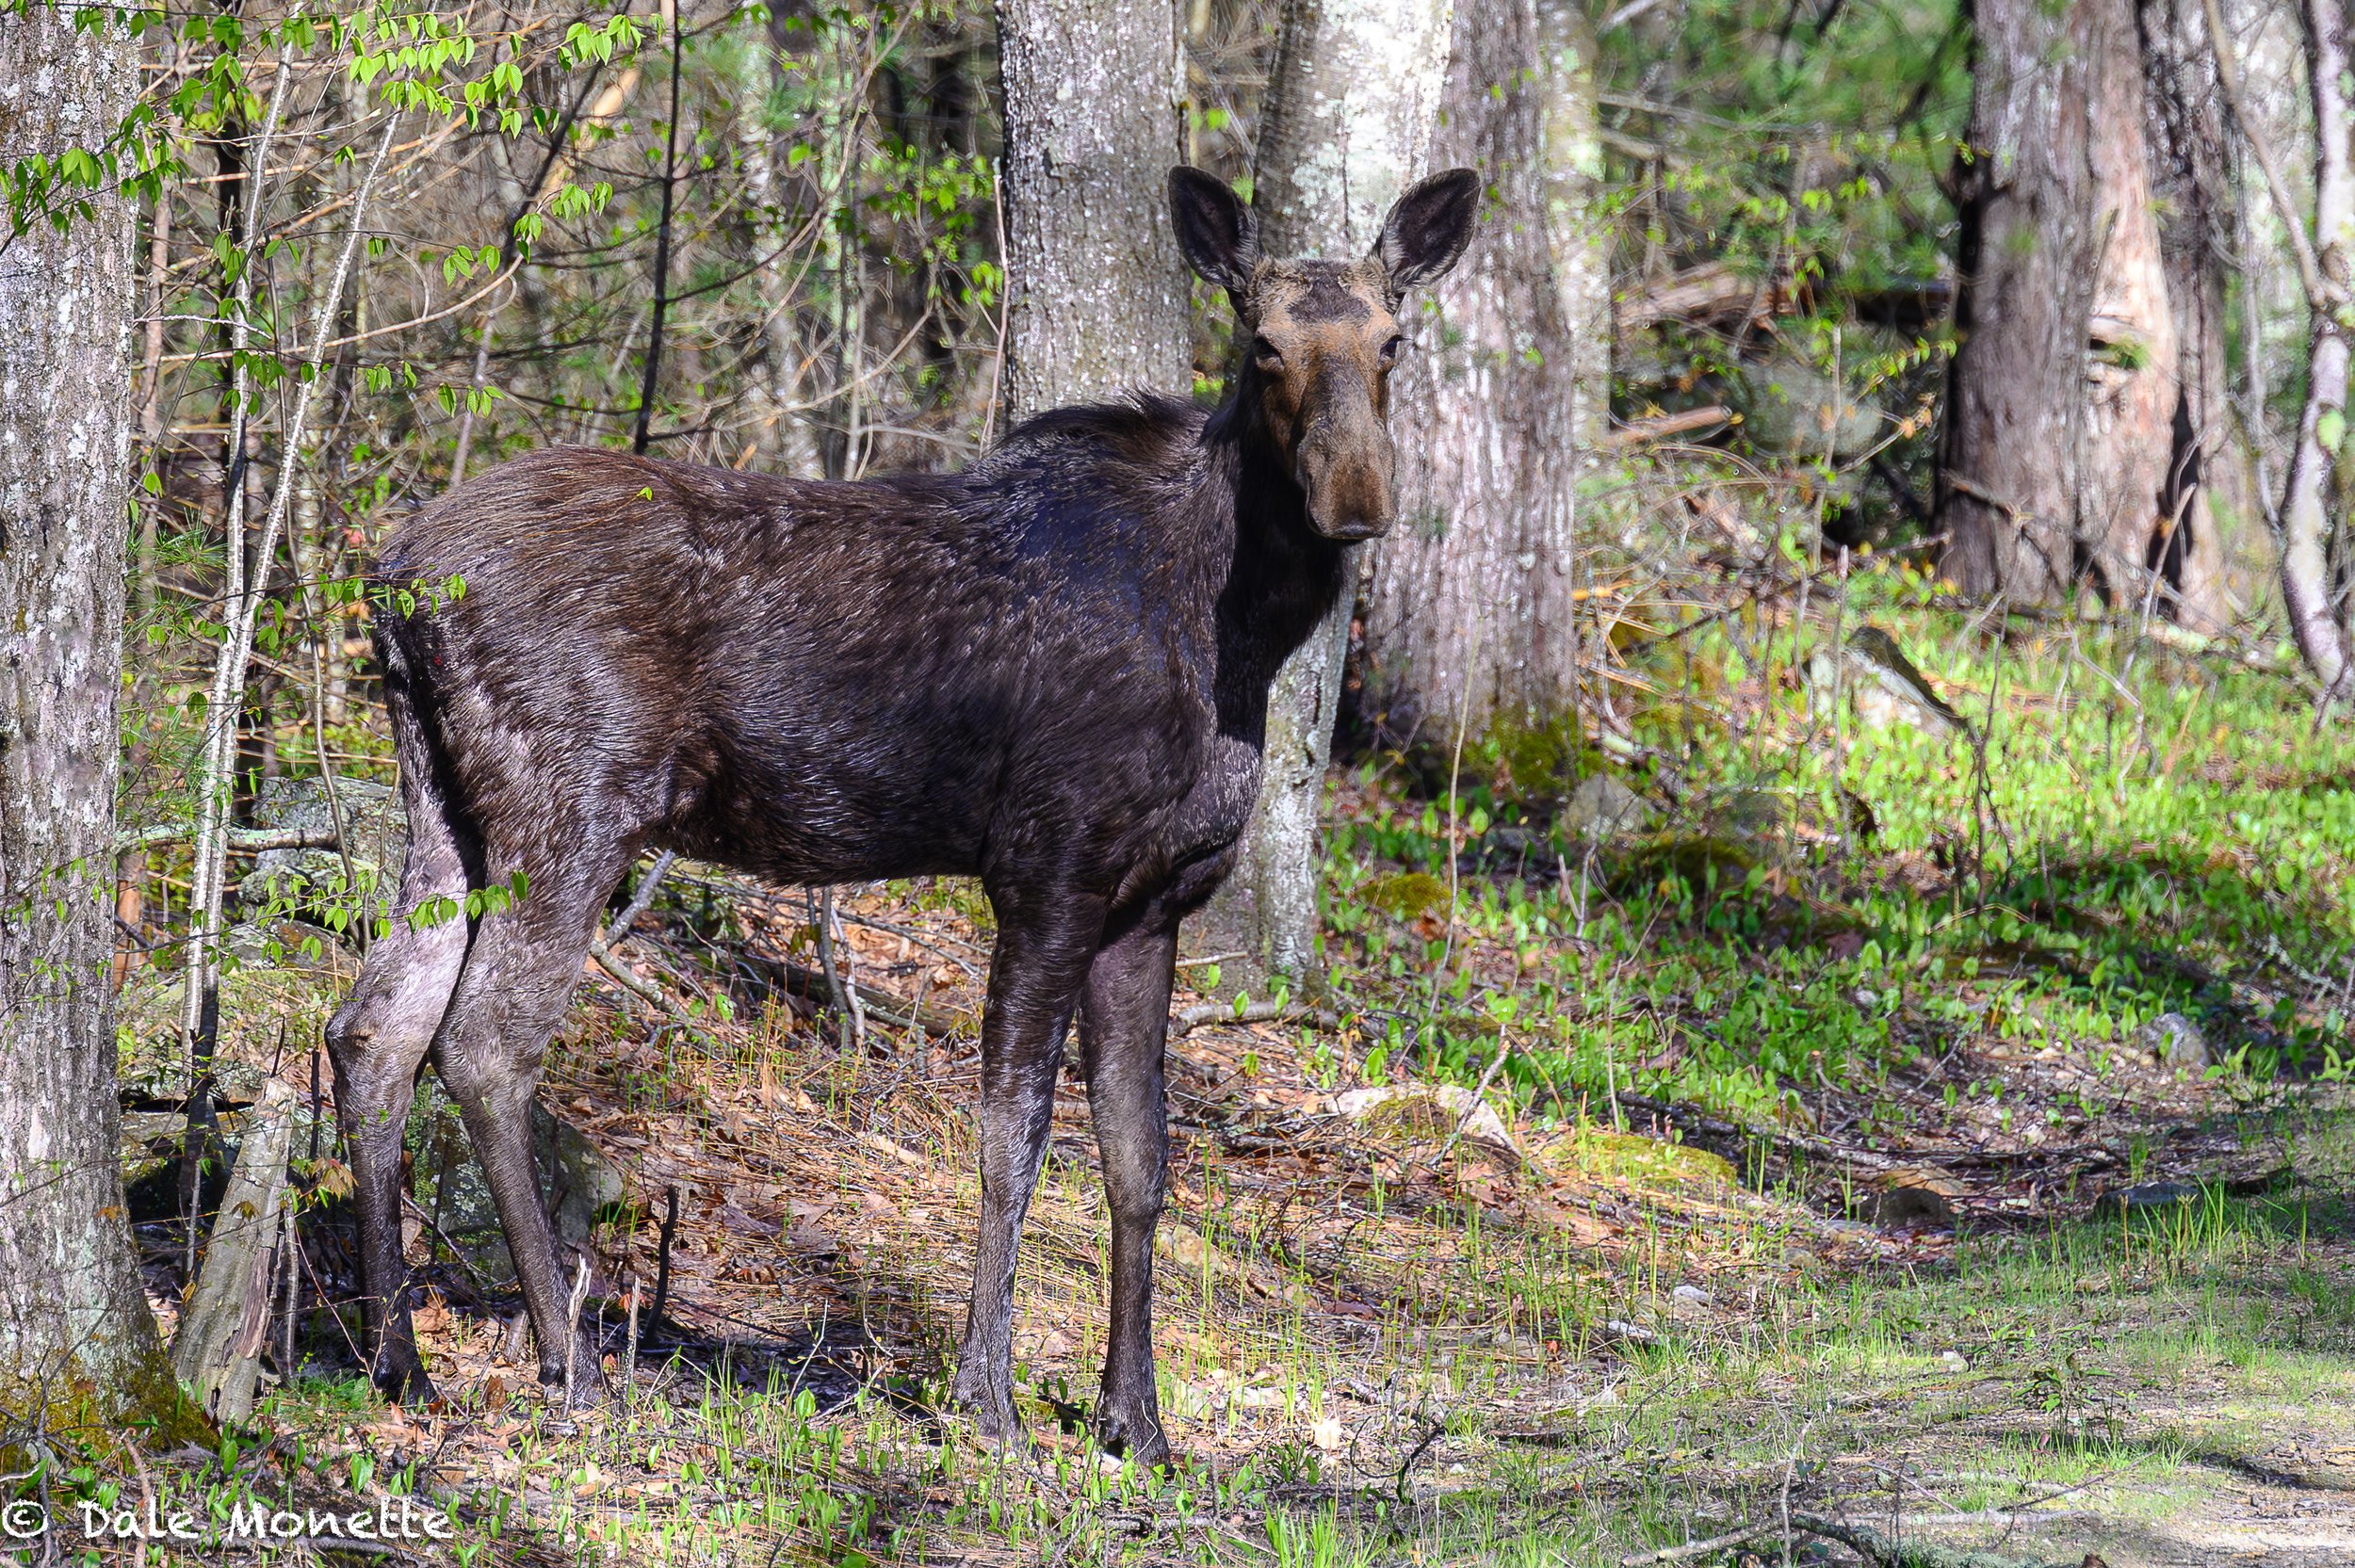   The lighting was great when this adult female moose walked across the road in front of me! You can see where she is shedding around her shoulders.  